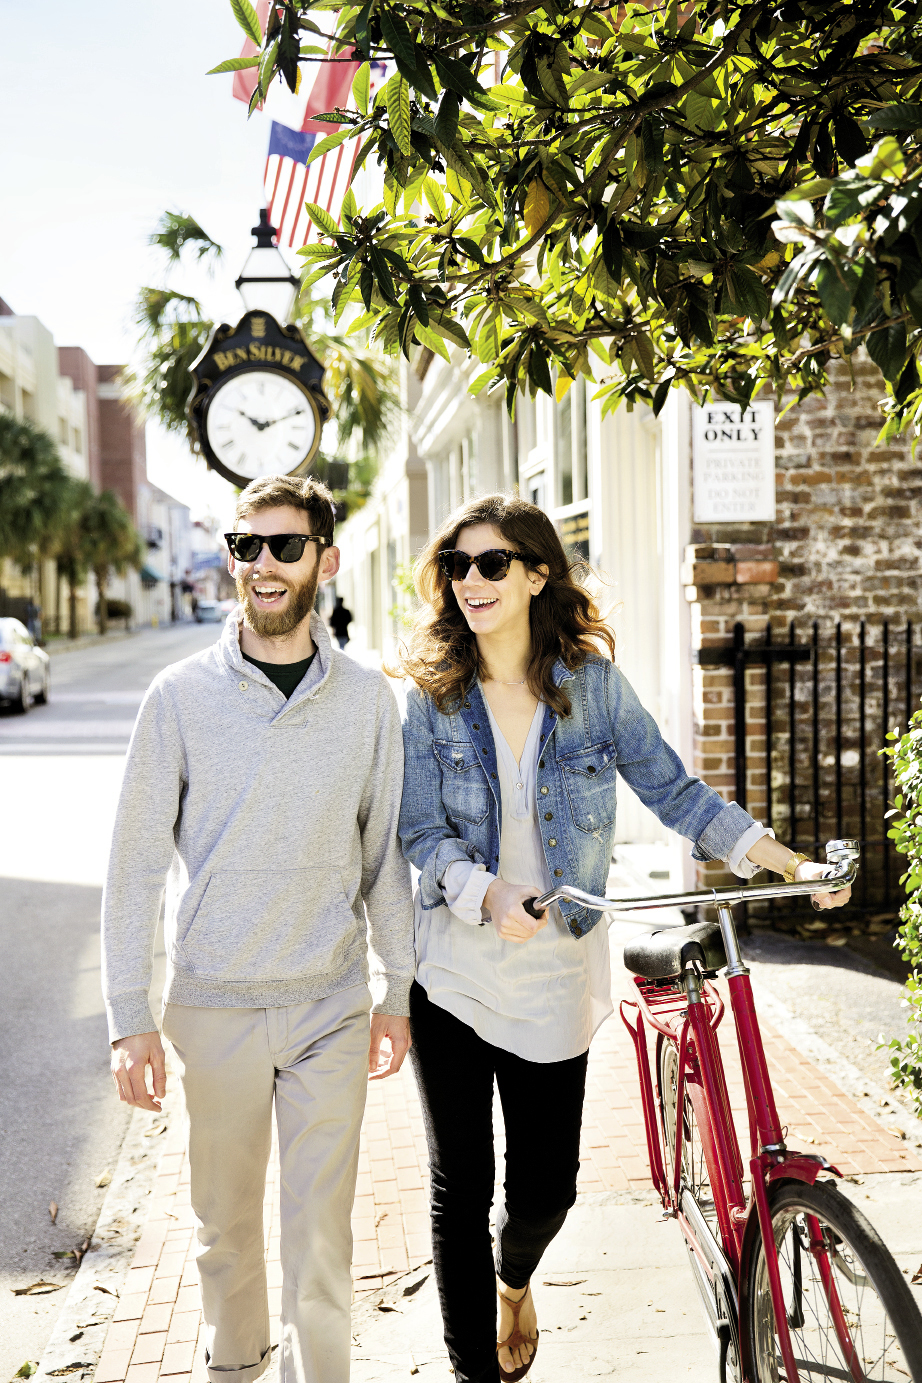 In Stride: Lindsey and his wife, Martina, walk or bike around town—to work, to shop, to go out, or to explore.